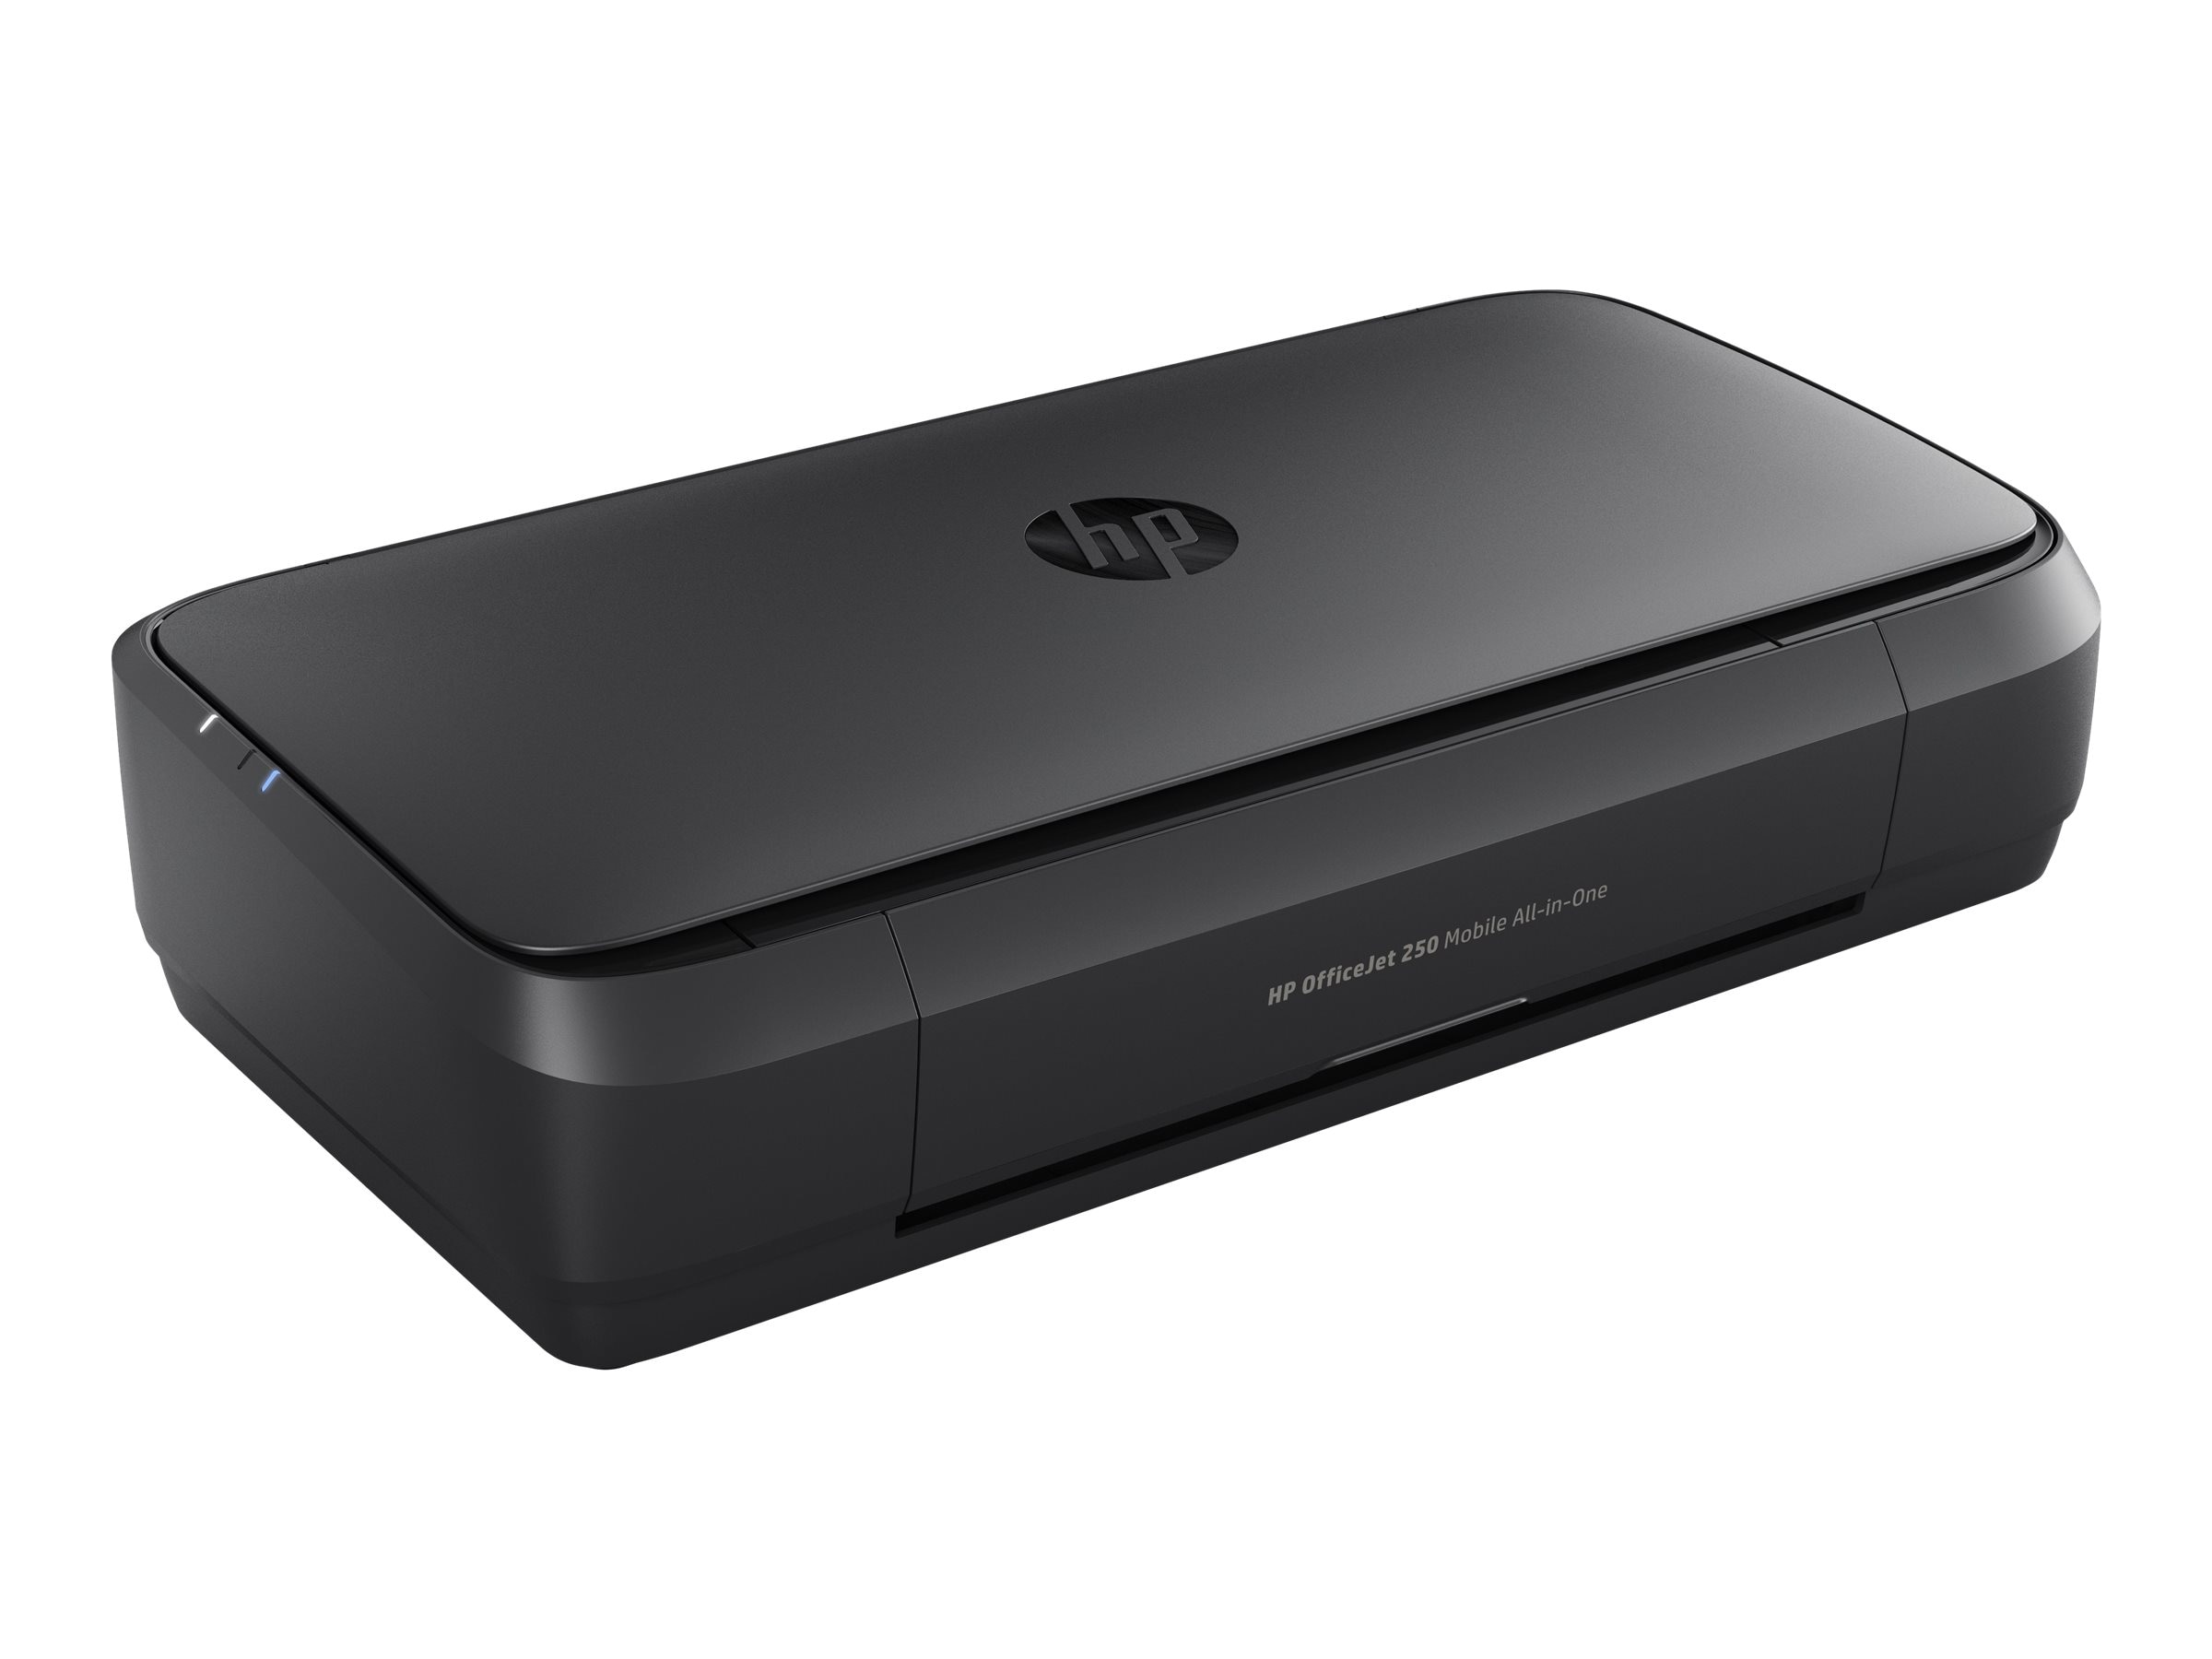 HP Officejet 250 Mobile All-In-One (CZ992A#B1H)